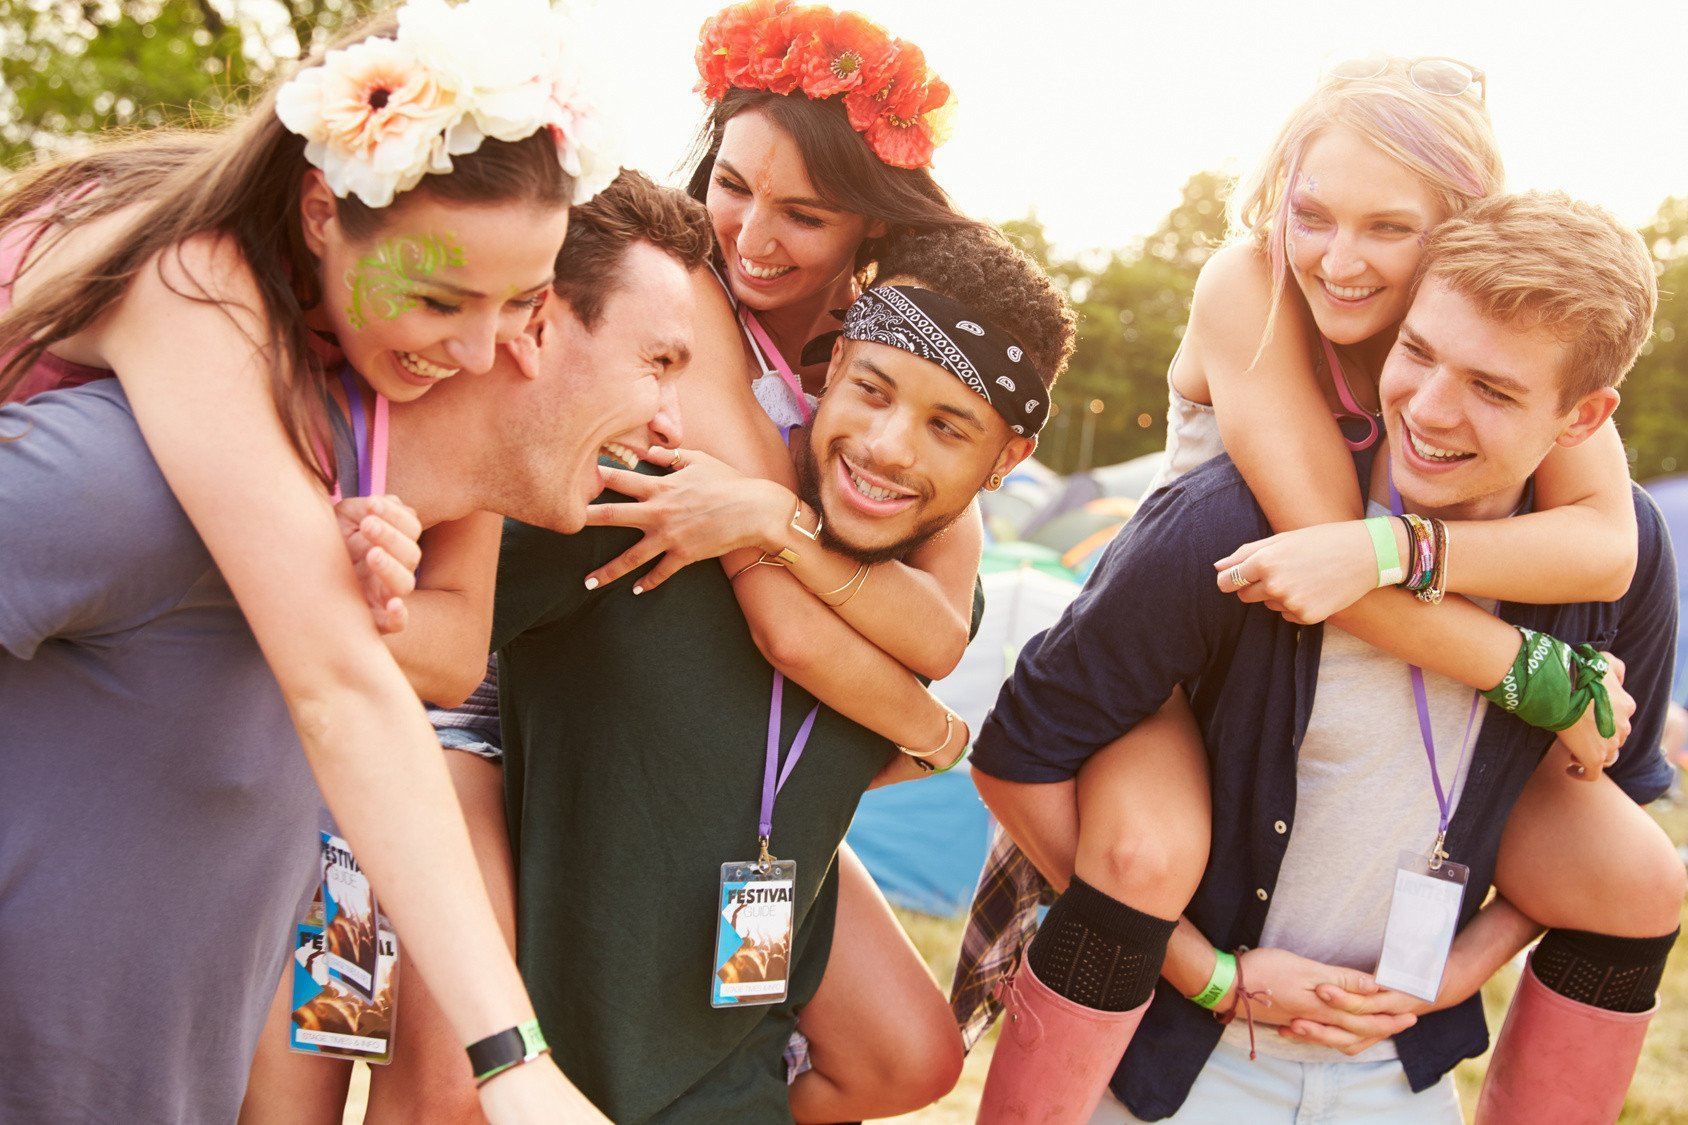 The Best Ways to Prepare for the Music Festival